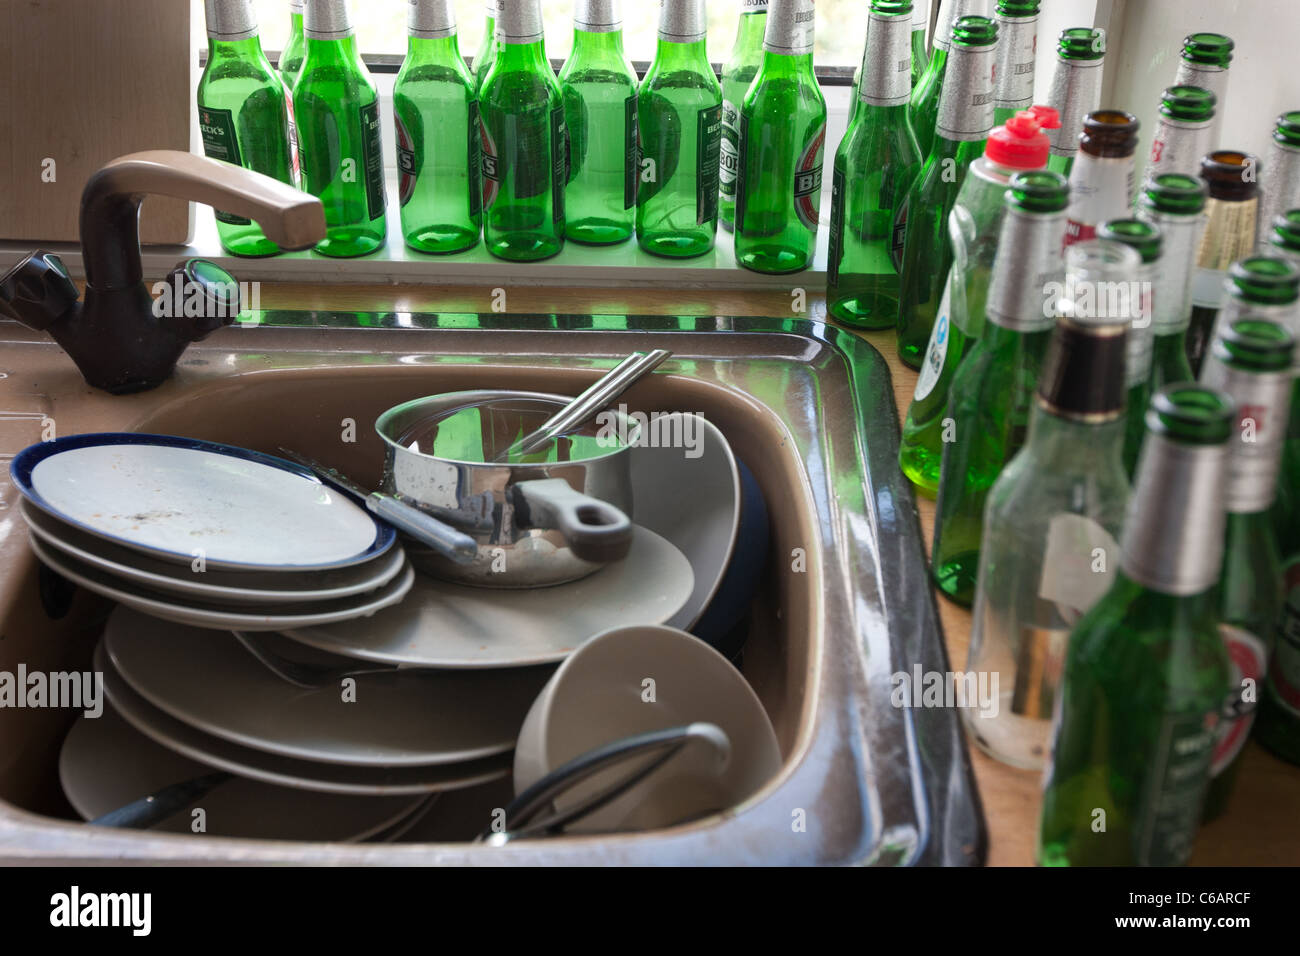 A kitchen sink full of dirty dishes and plates, surrounded by numerous empty green beer bottles. Stock Photo